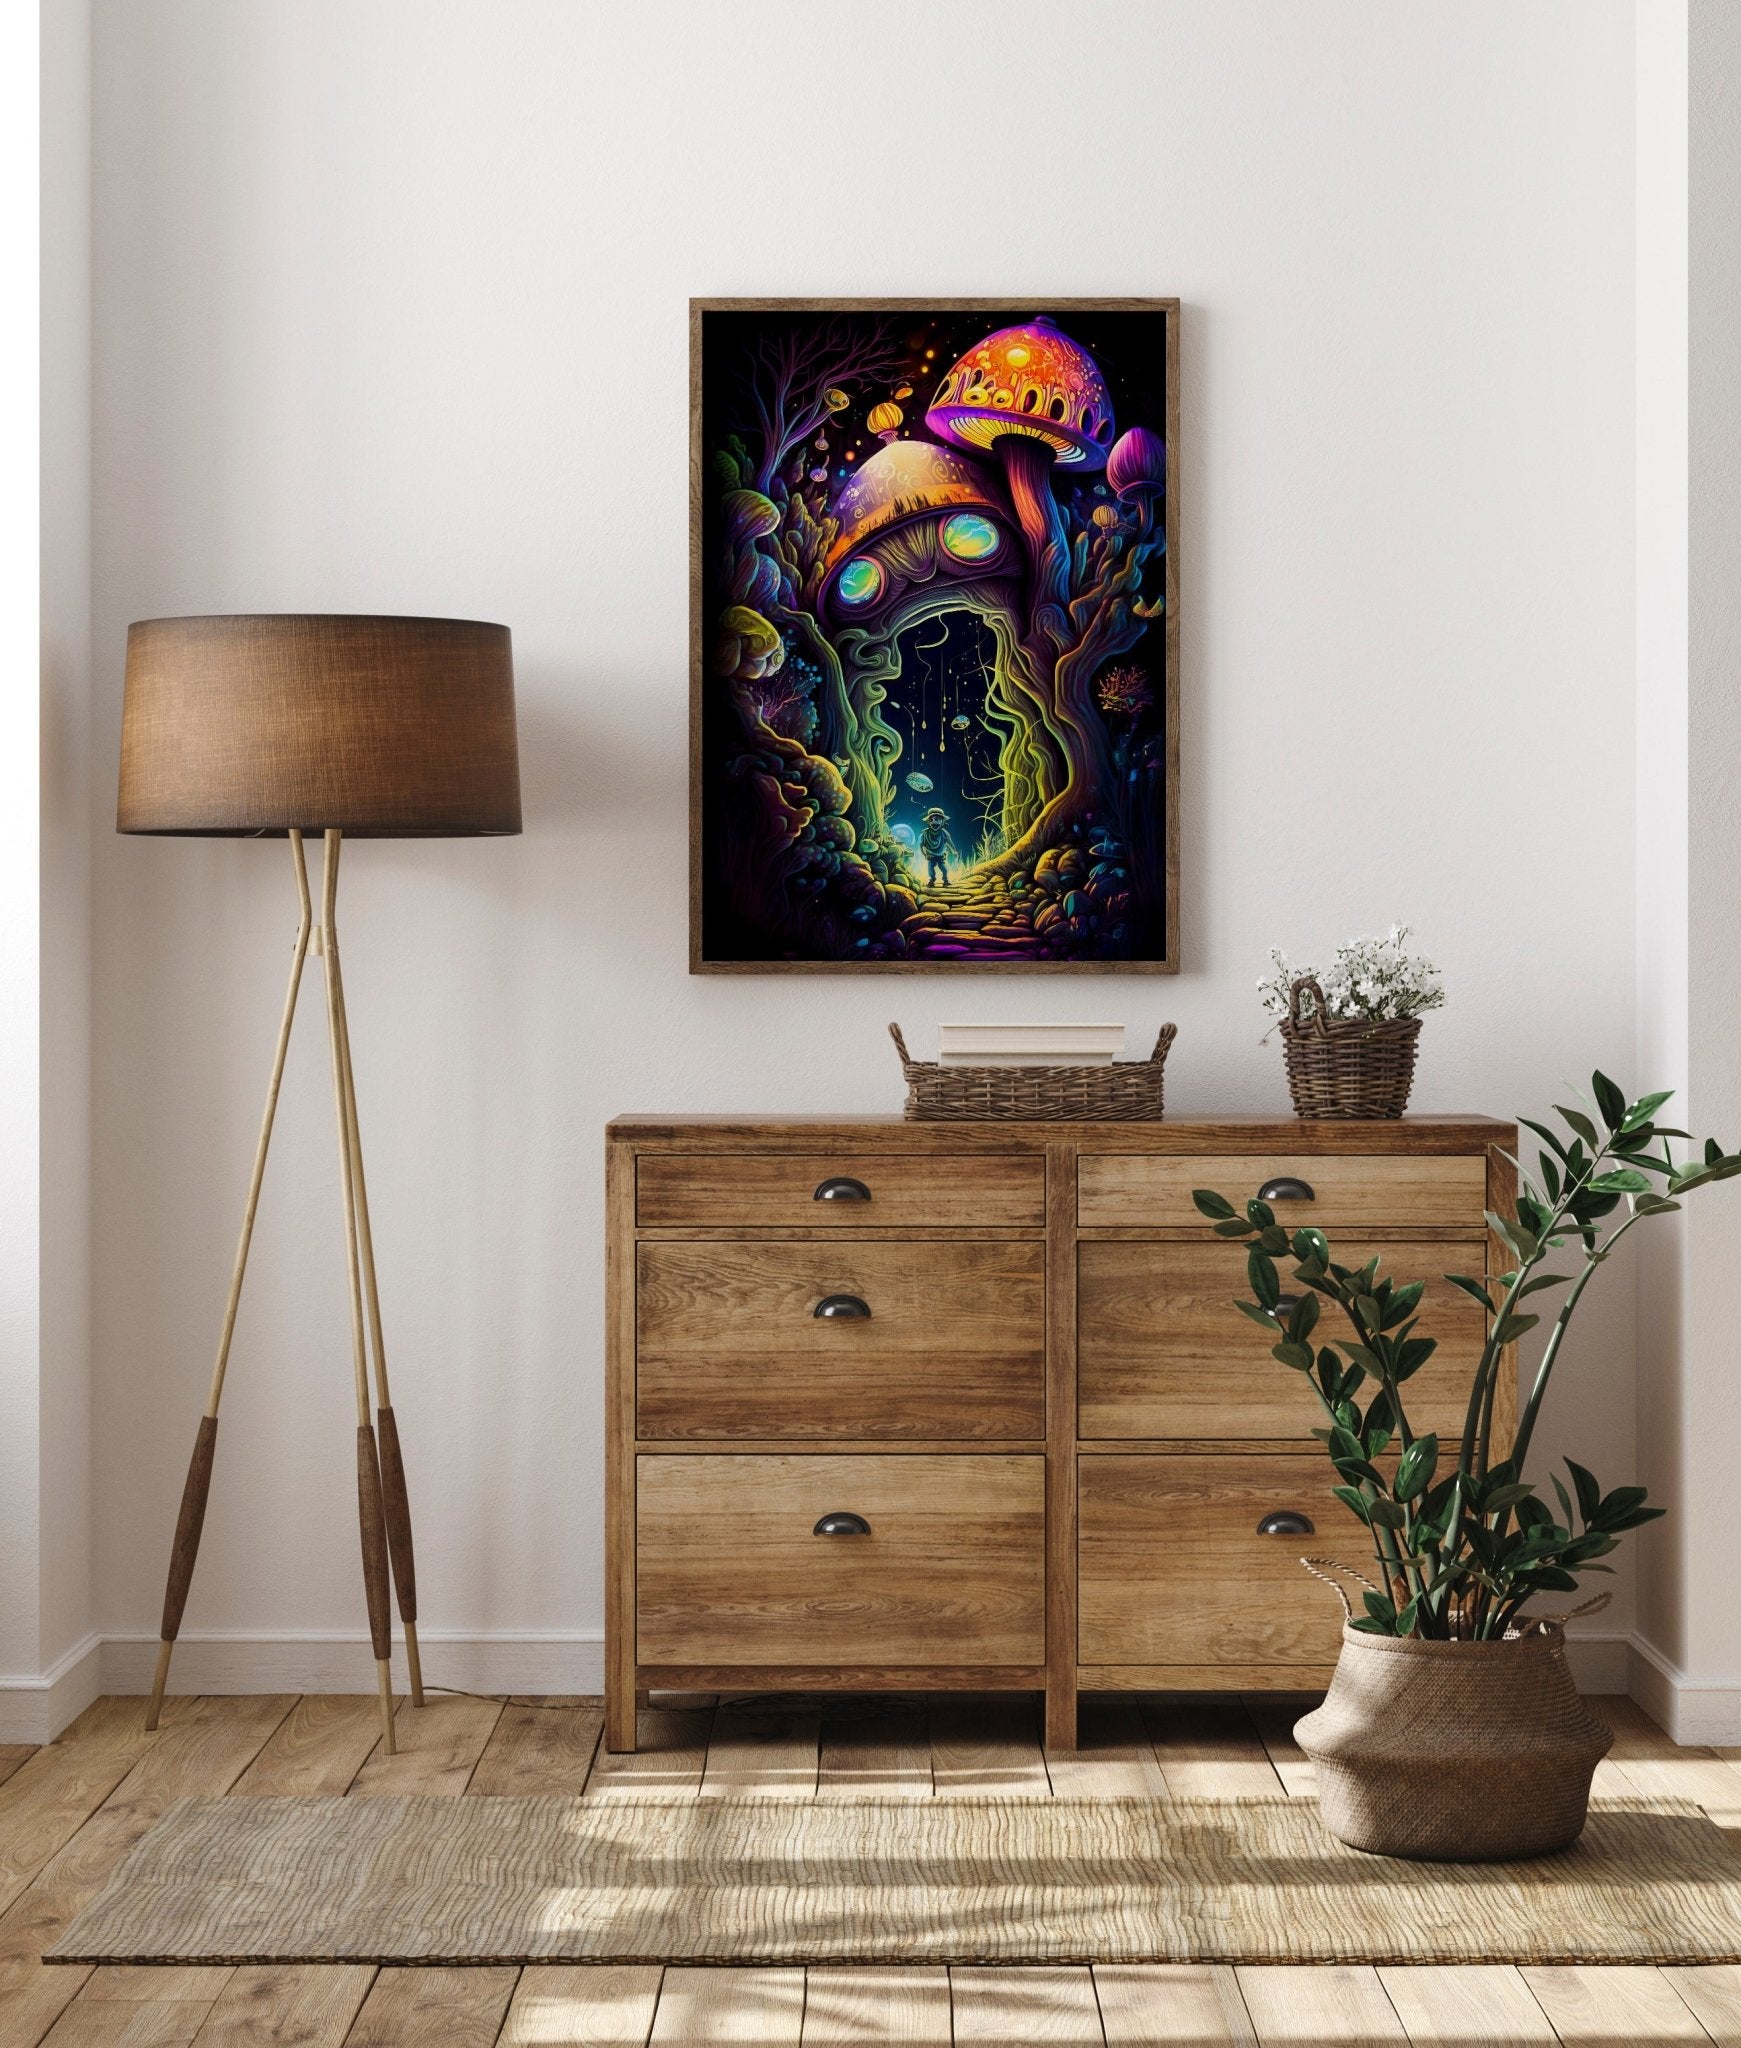 Trippy Psychedelic Abstract Wall Art | Surreal Magic Mushroom Forest Fantasy Illustration - Vivid Roads